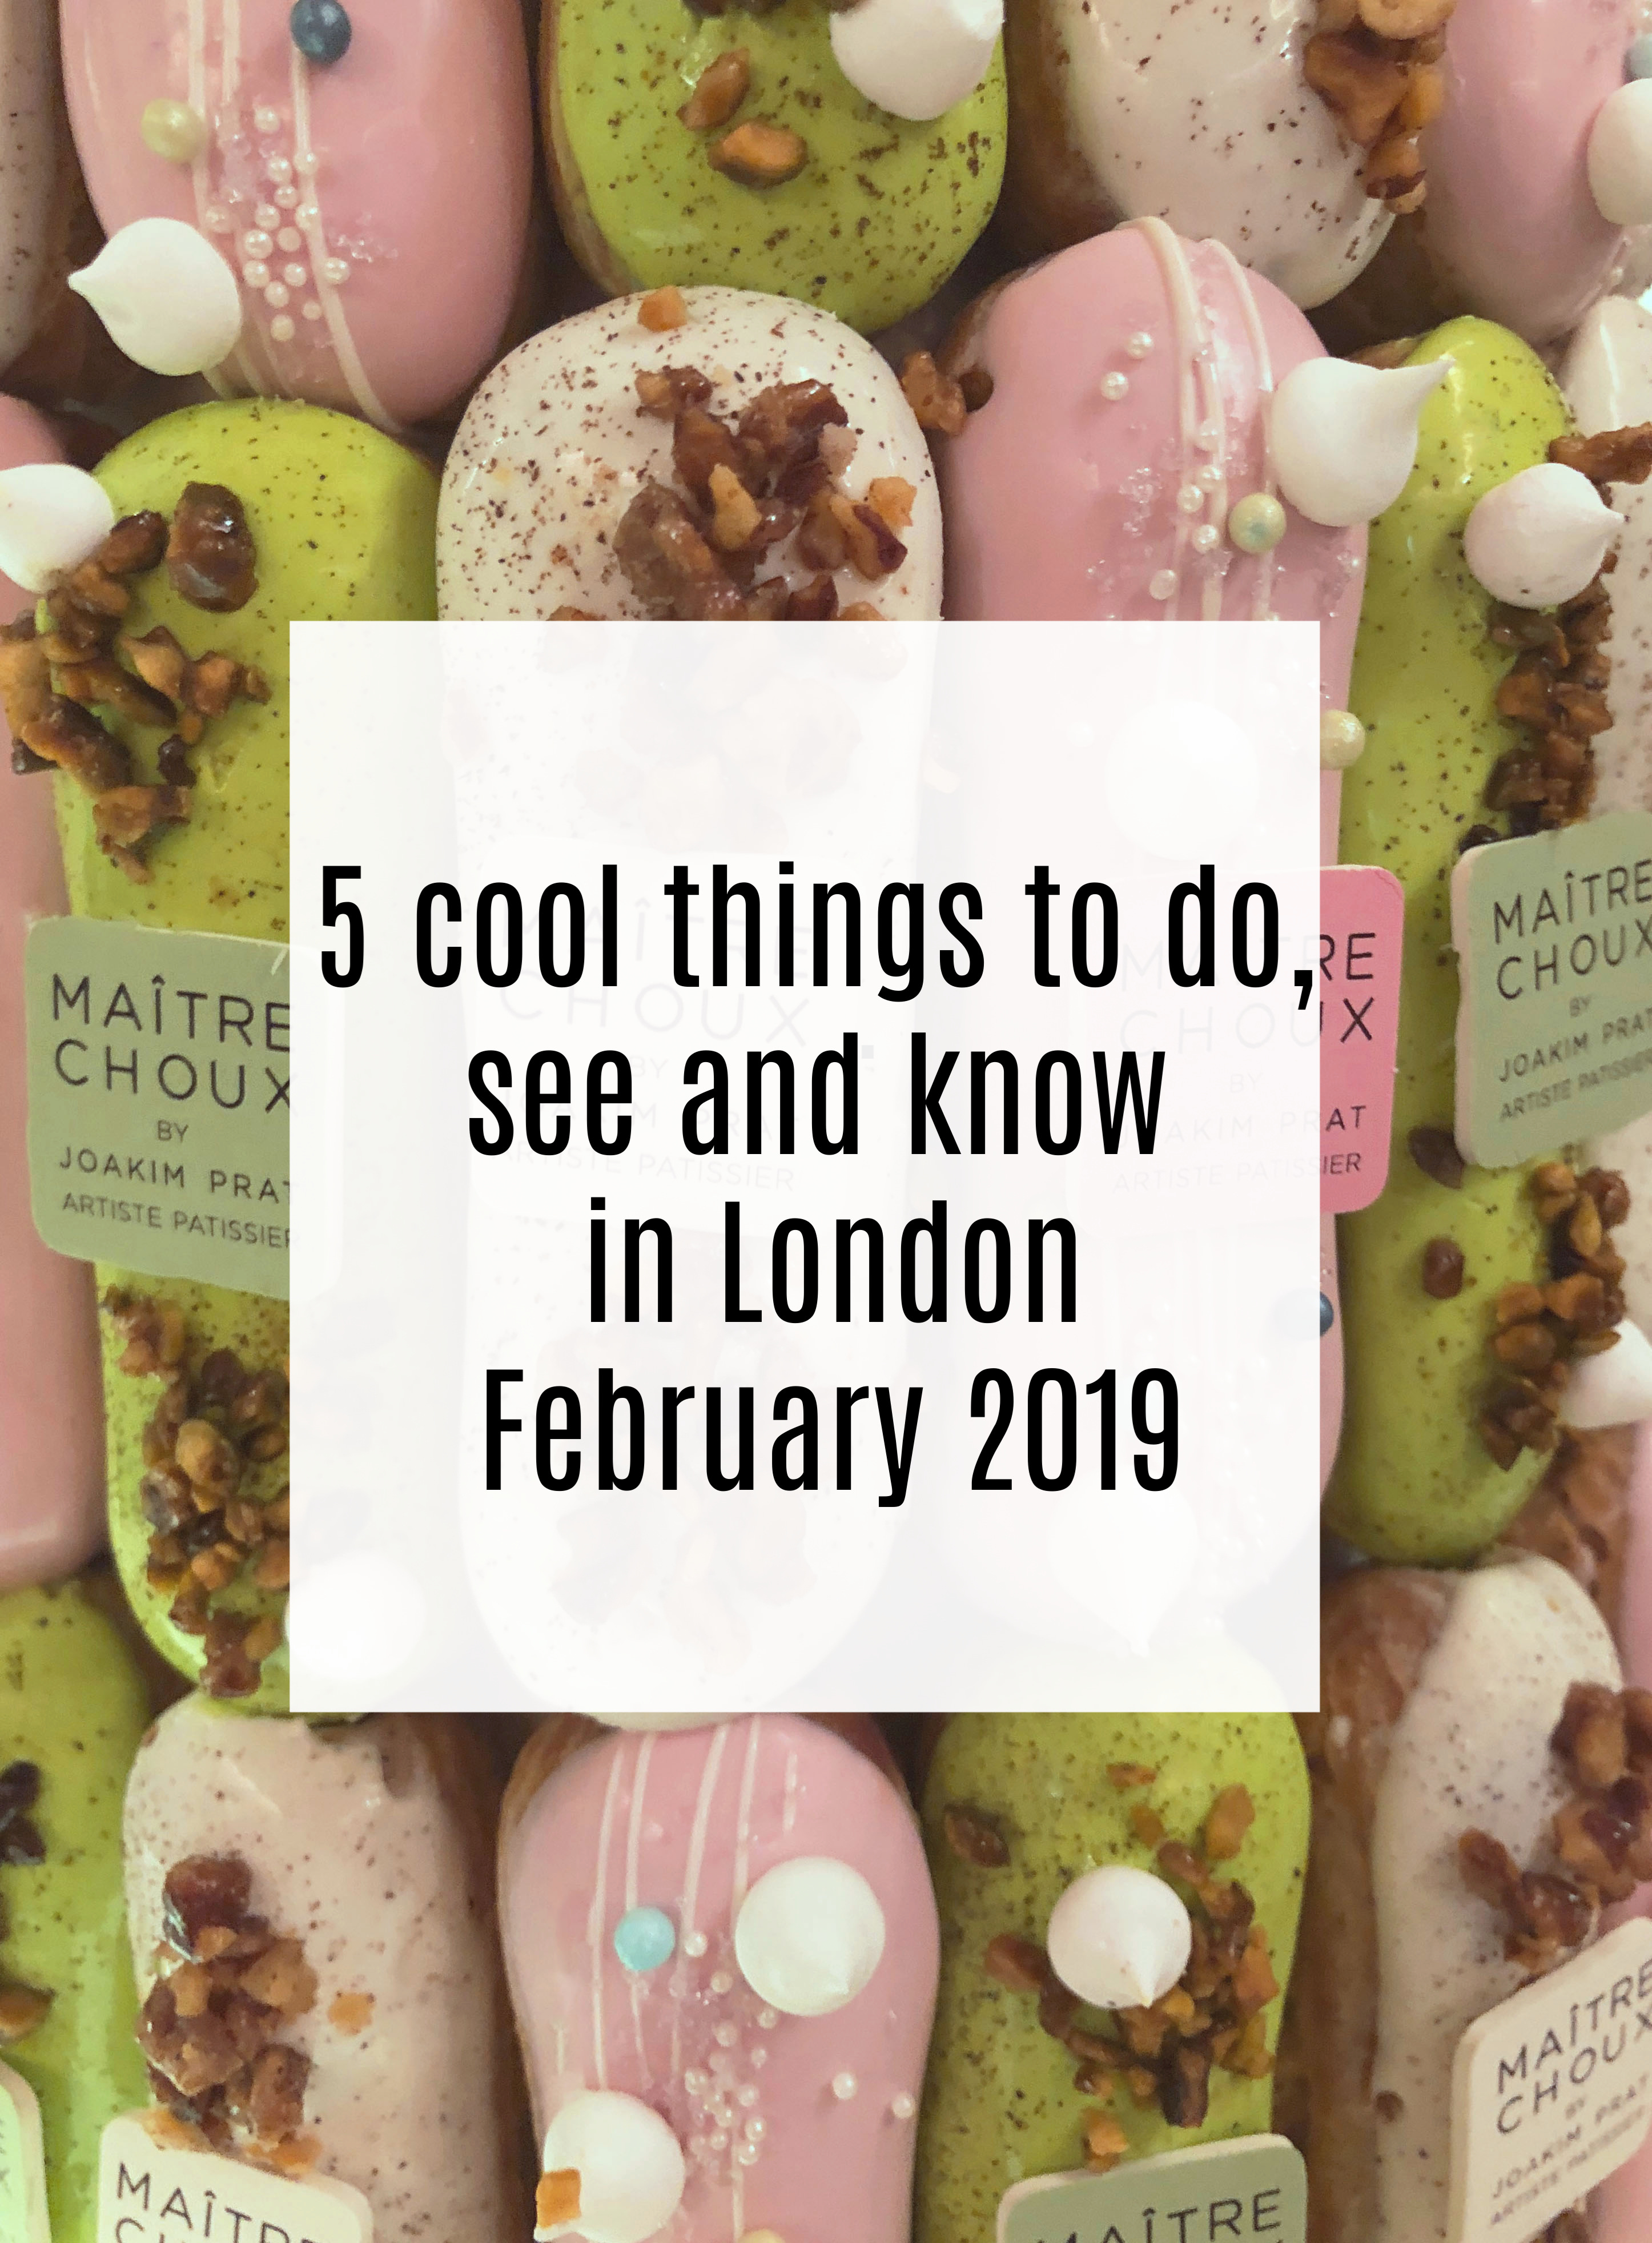 5 cool things to do, see and know in London 2019